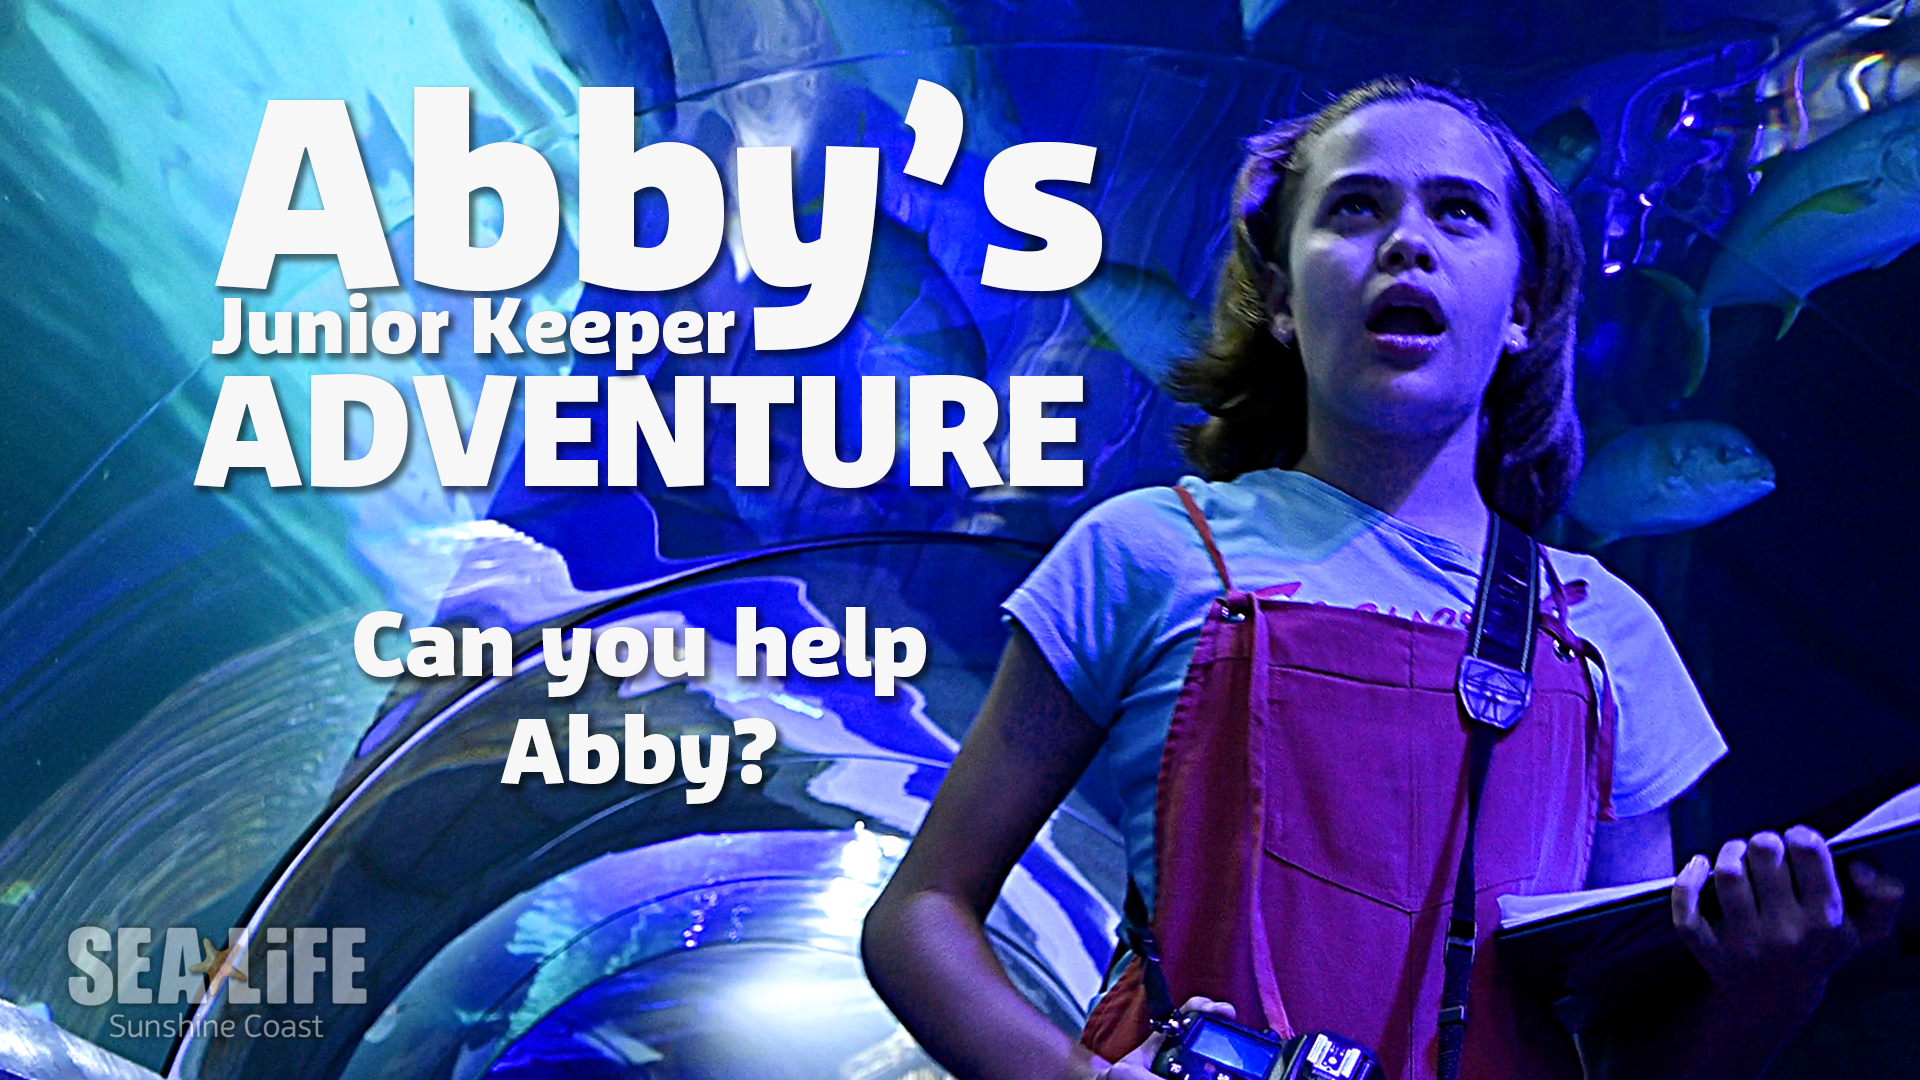 Abby's Junior Keeper HD Poster